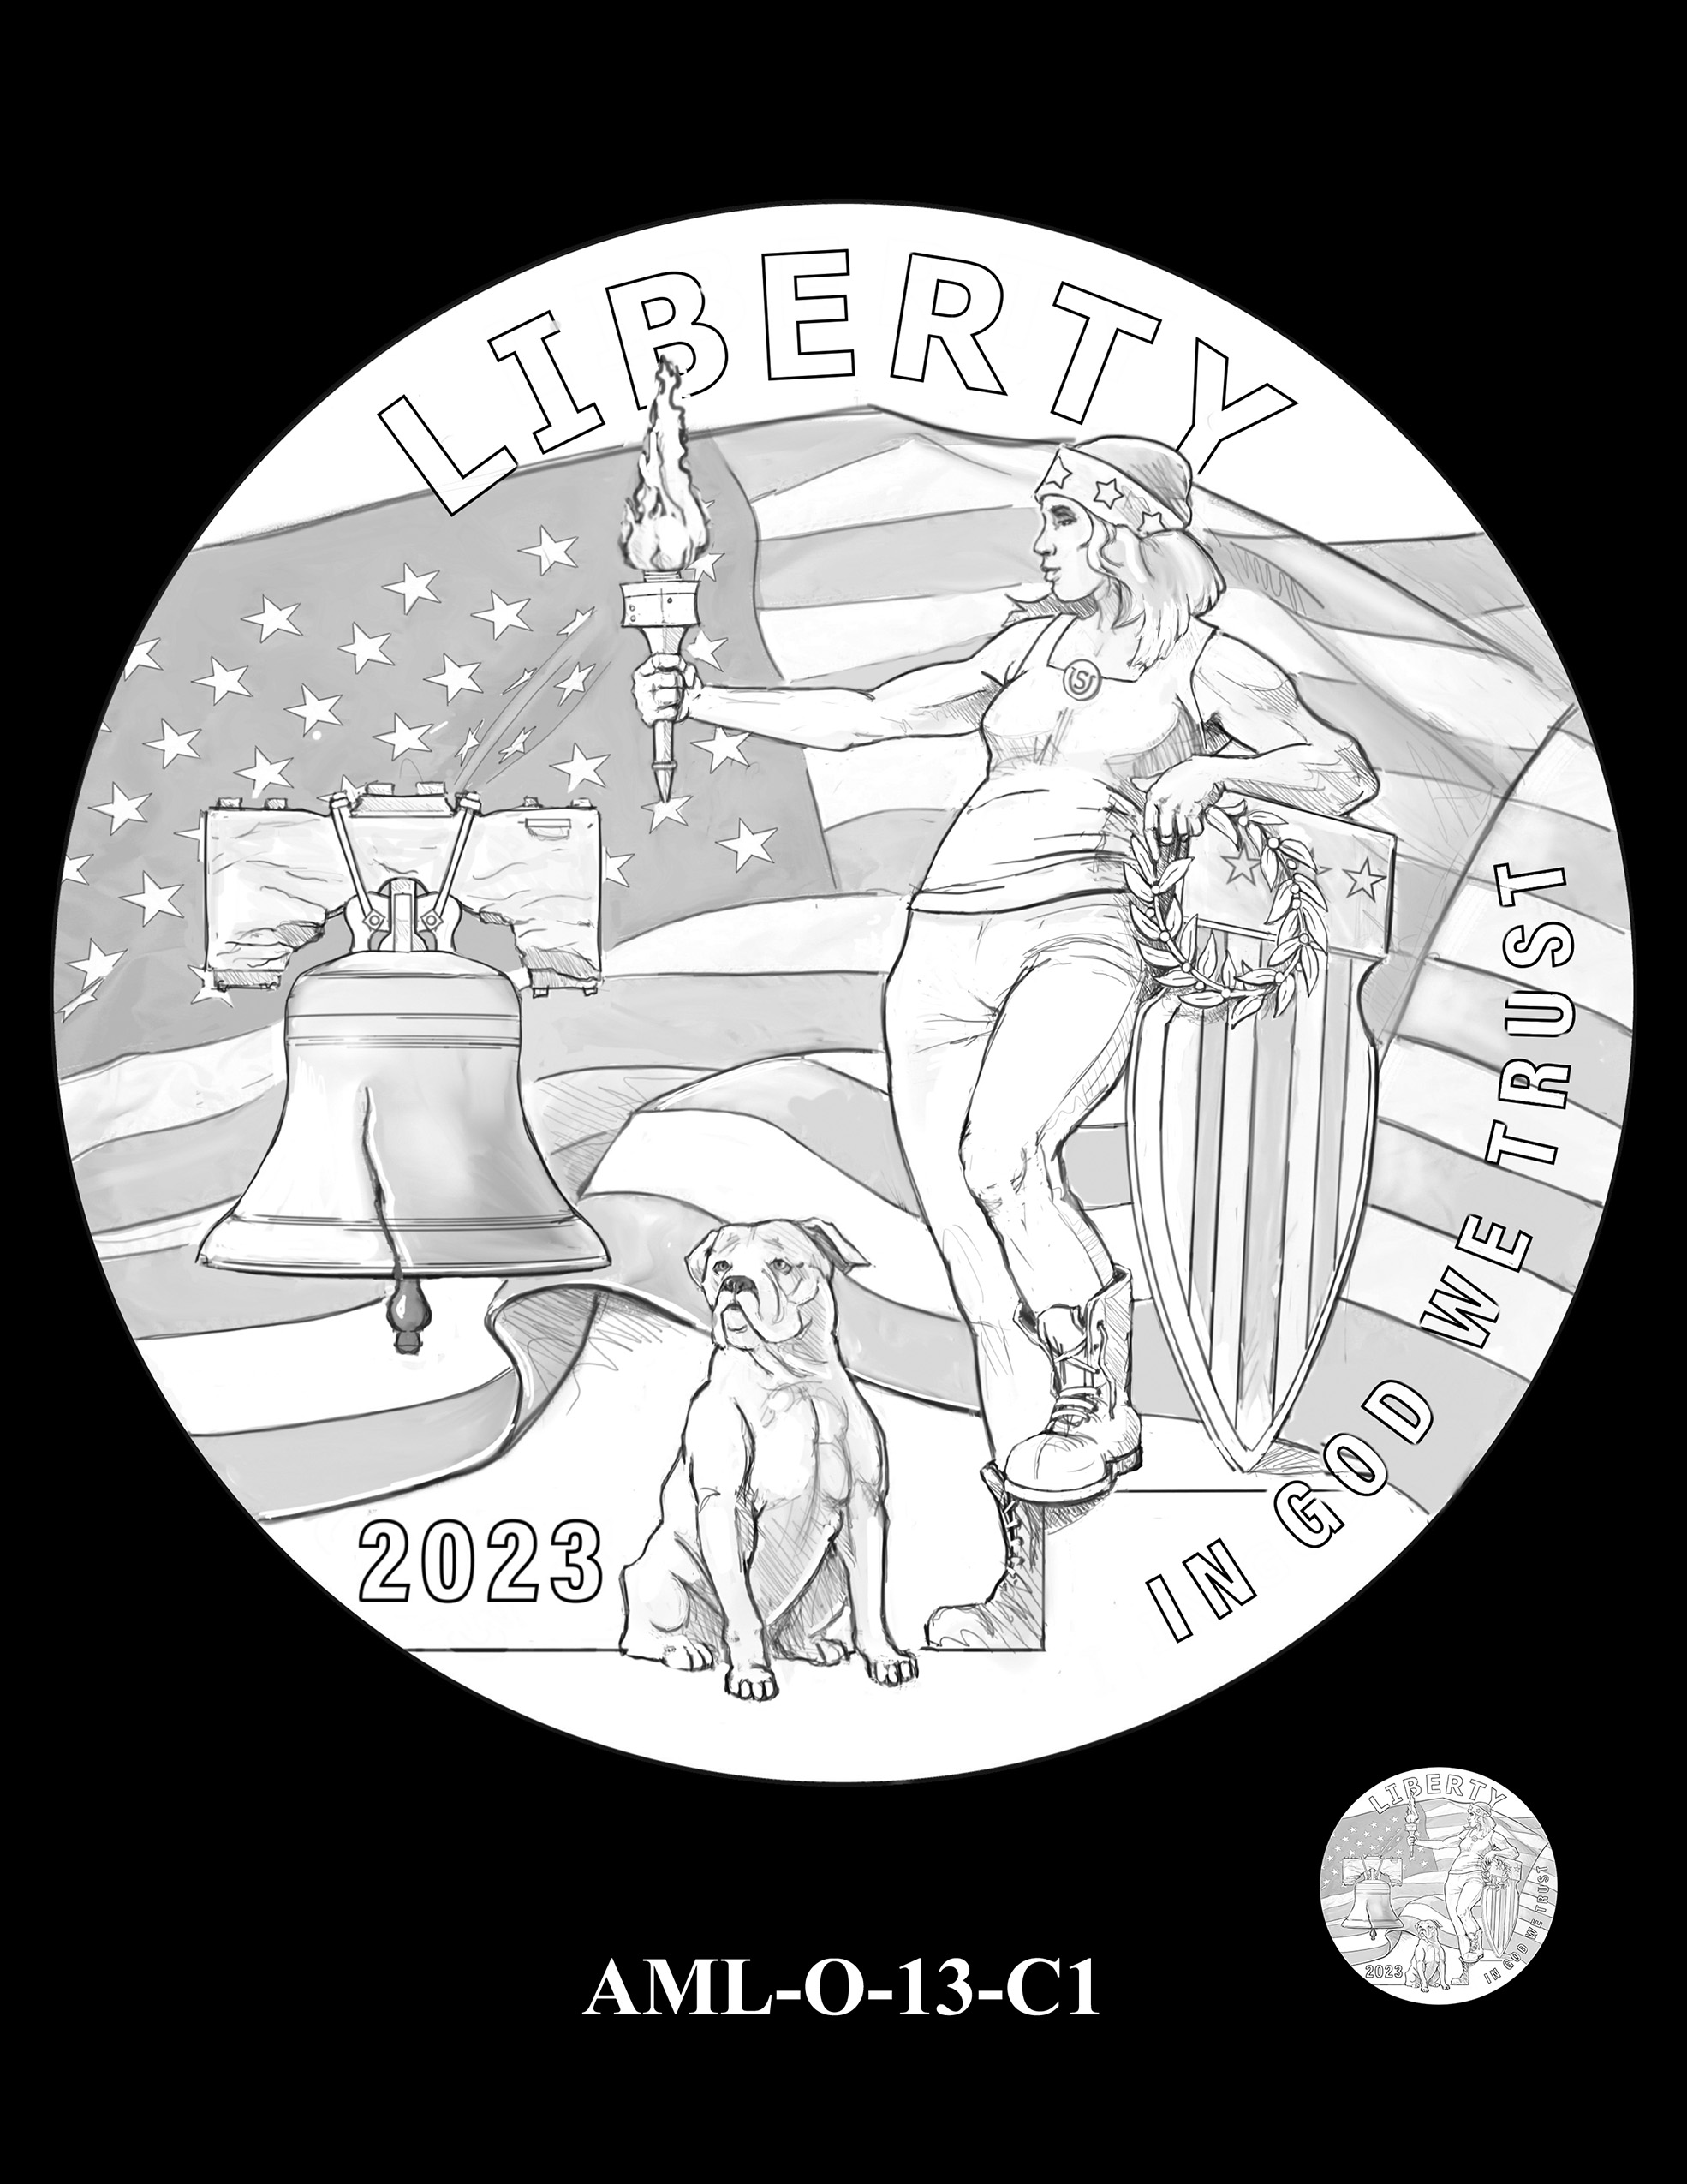 AML-O-13-C1 -- 2023 American Liberty High Relief 24k Gold and Silver Medal Program